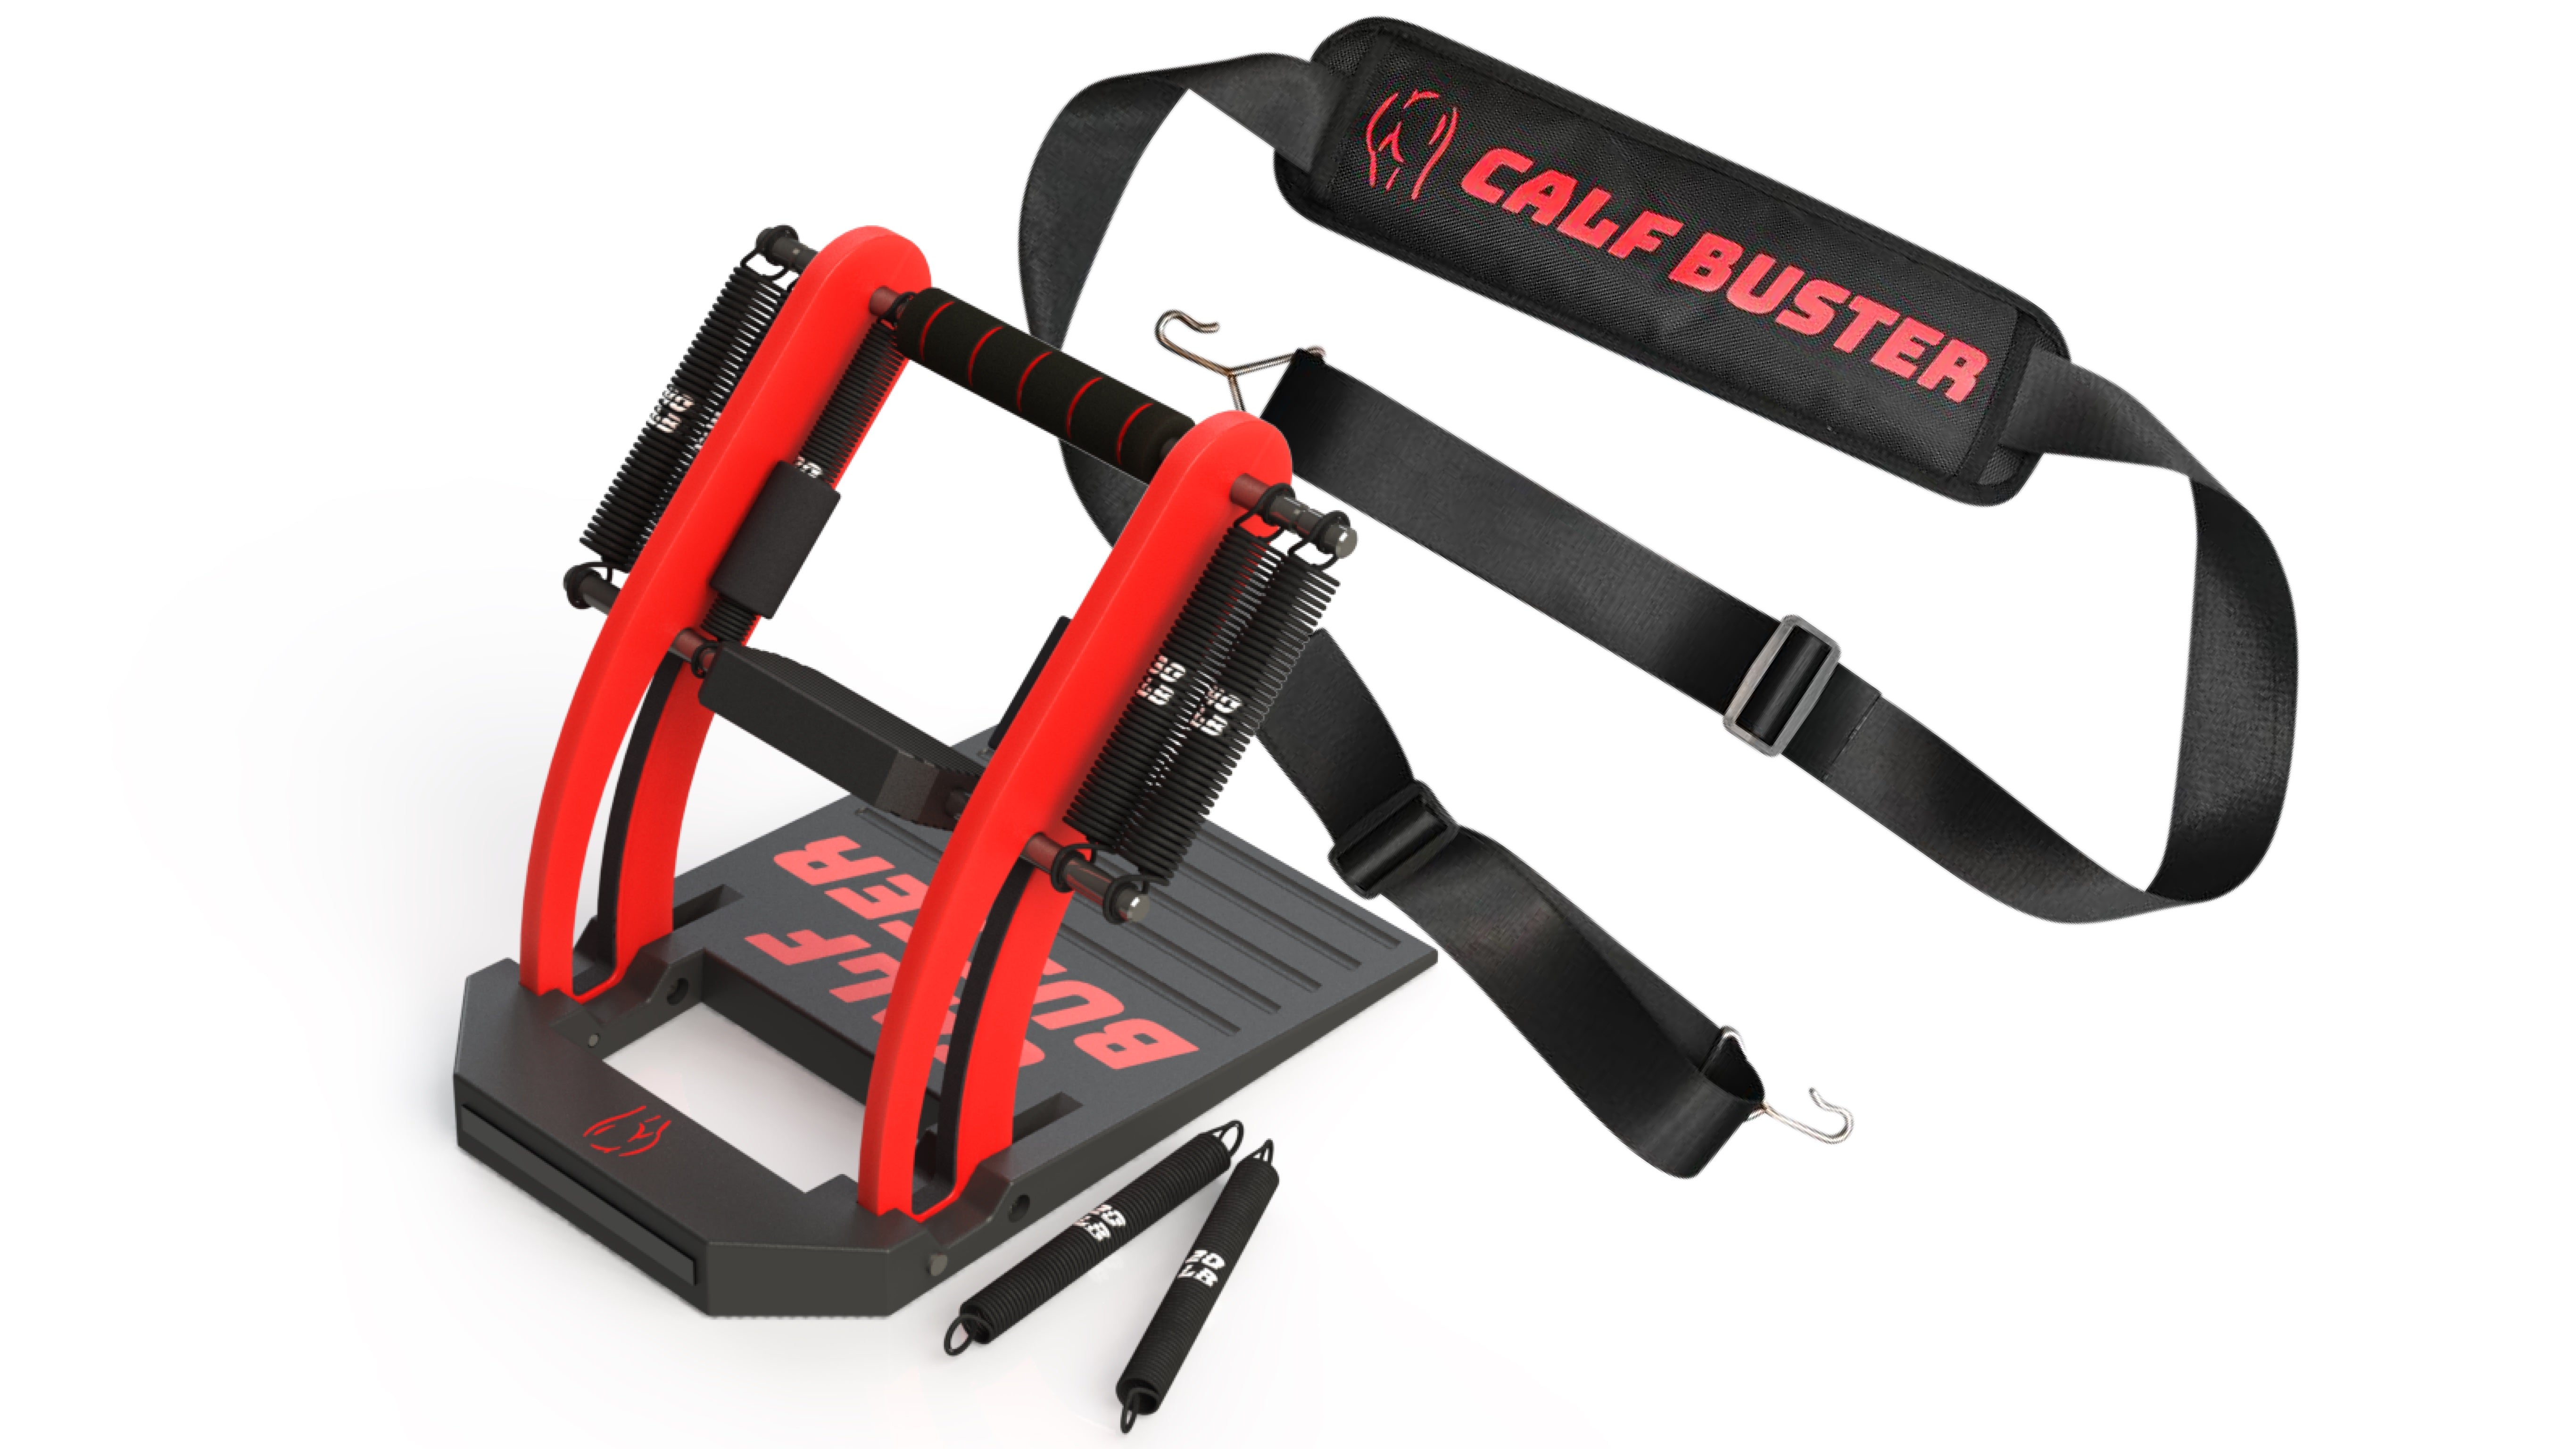 Calf Buster V2 - Calf Extension Machine for Calf Growth, Strength, Rehab, Ankle Strength